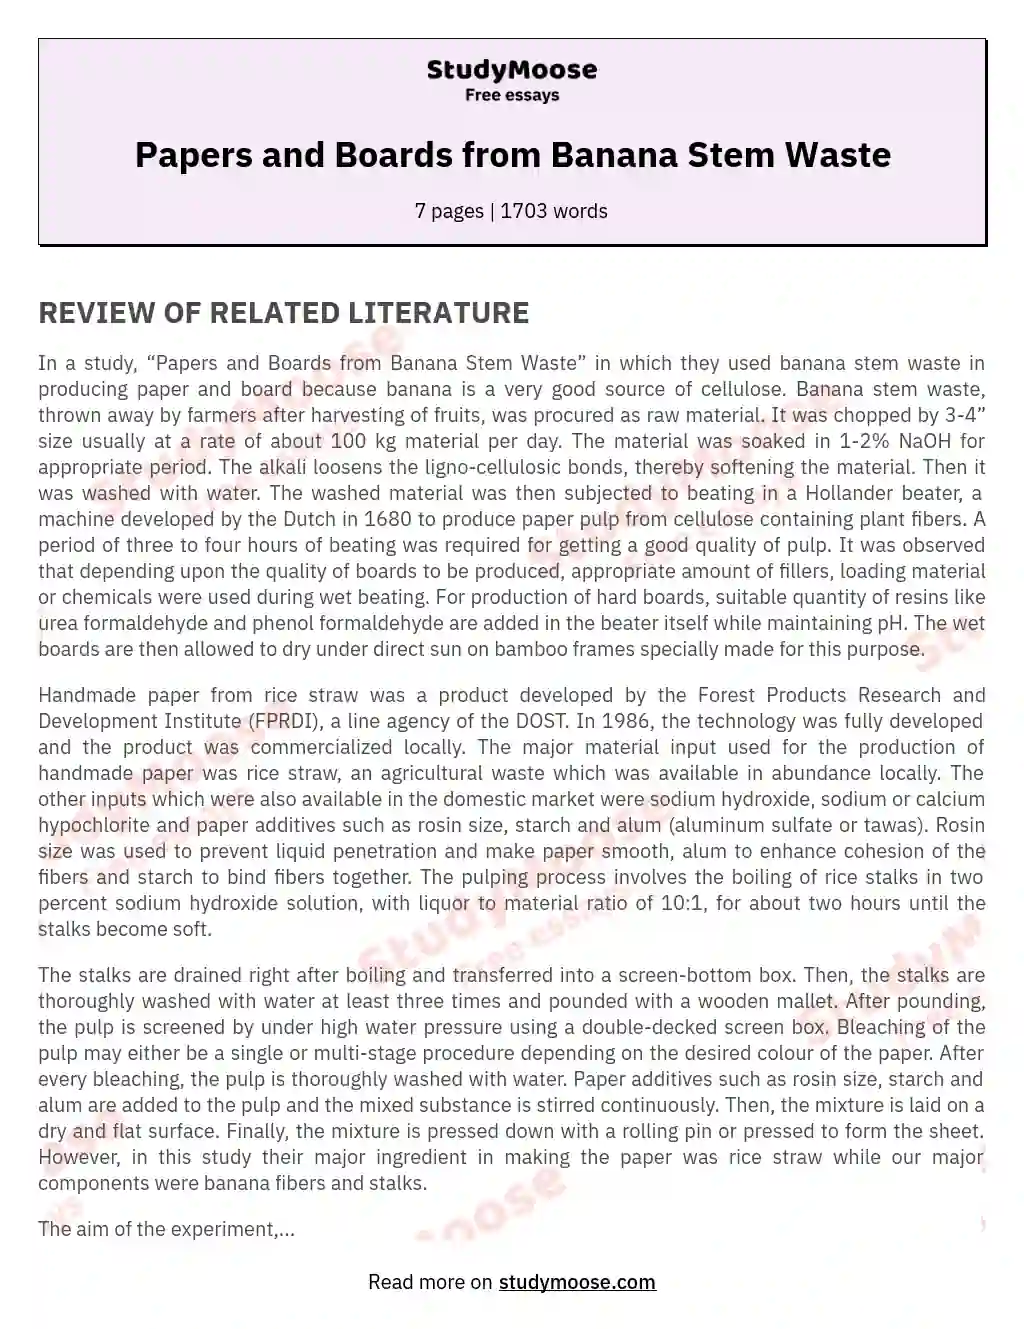 Papers and Boards from Banana Stem Waste essay